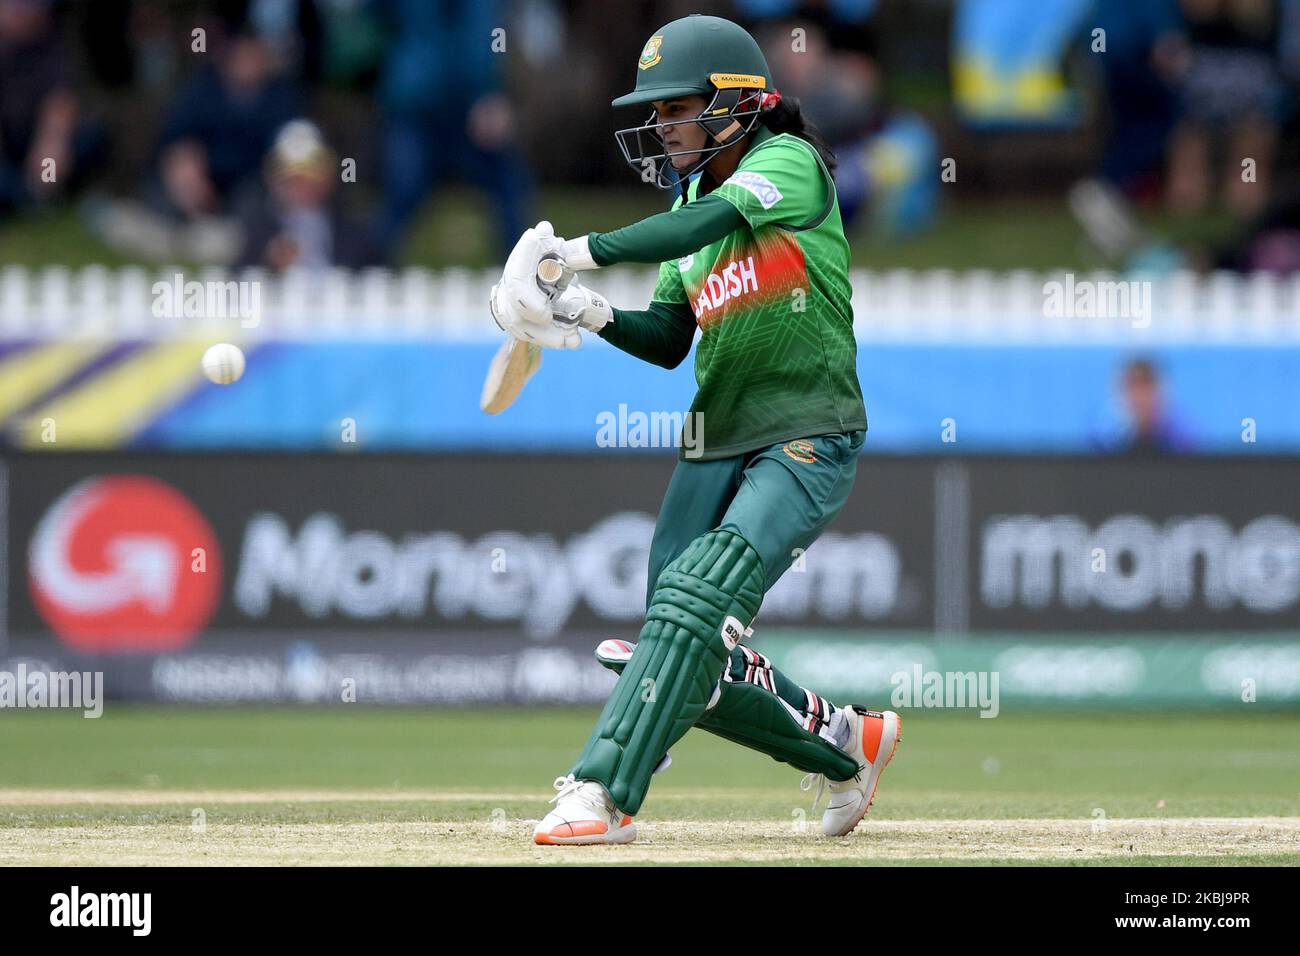 Nigar Sultana Joty of Bangladesh hits the ball during the Sri Lanka v Bangladesh Women's T20 Cricket World Cup match at Junction Oval on March 2 in Melbourne, Australia (Photo by Morgan Hancock/NurPhoto) Stock Photo